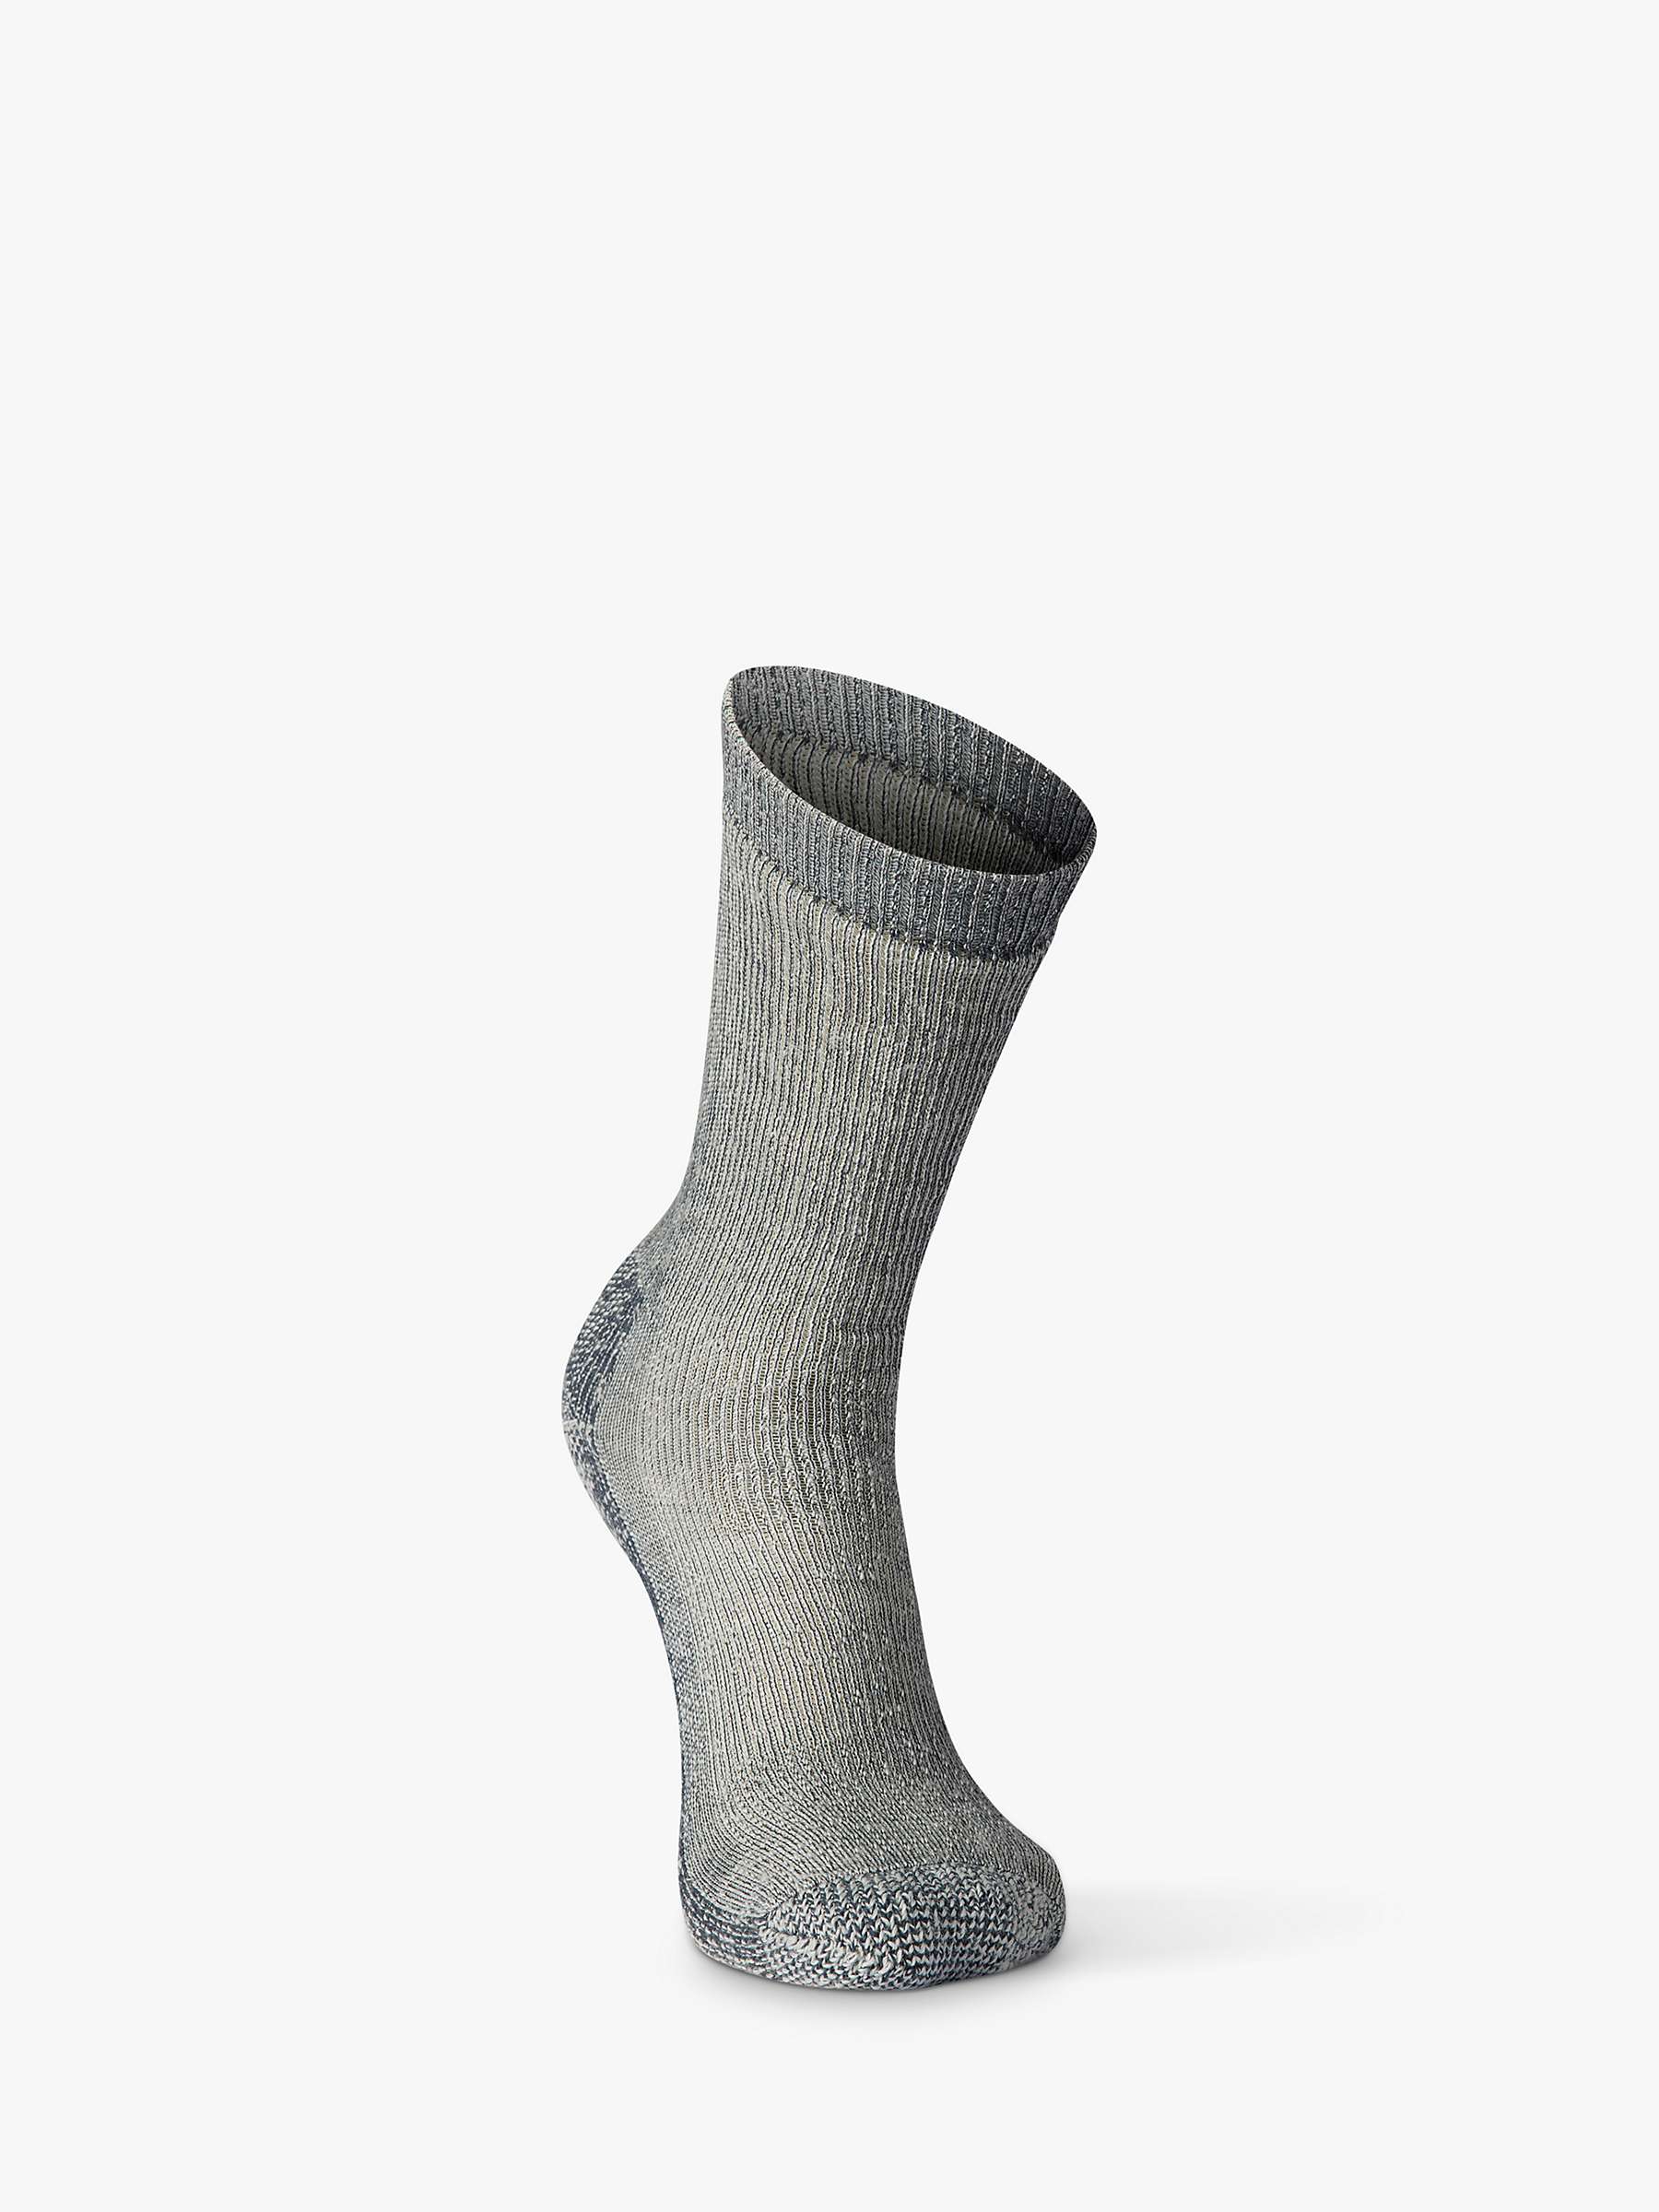 Buy SmartWool Hike Classic Edition Extra Cushion Crew Socks Online at johnlewis.com